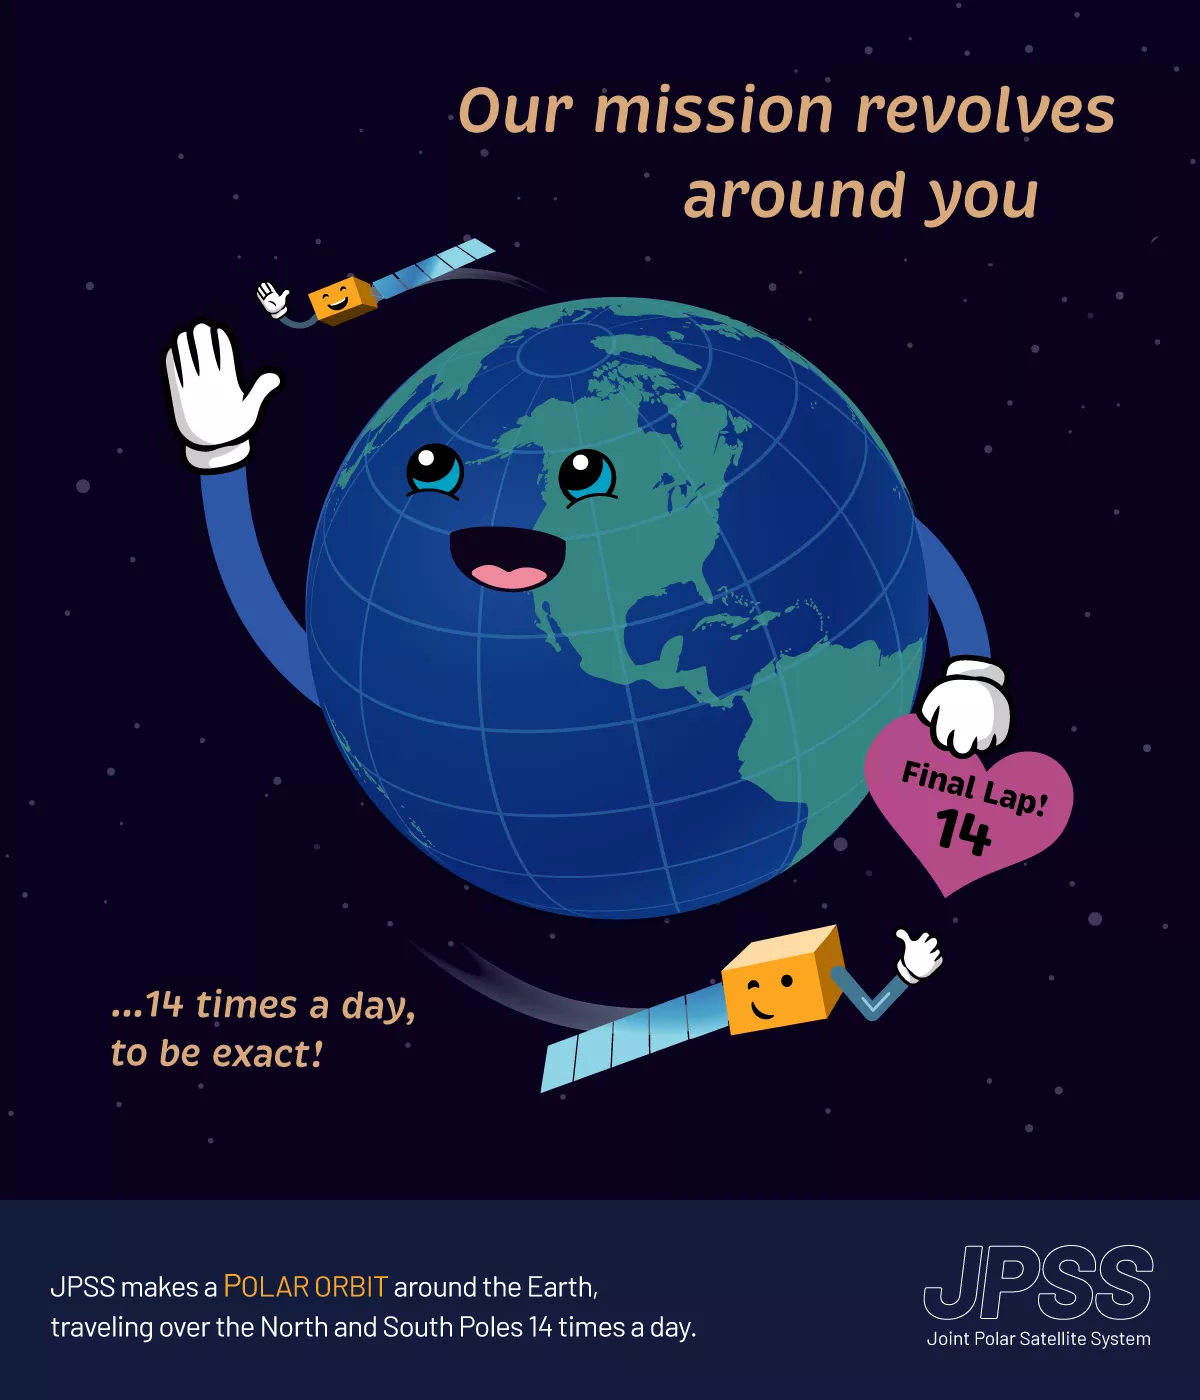 Whimsical illustration of a cartoon Earth waving to 2 satellites as they orbit the Earth. Text reads "Our mission revolves around you...14 times a day to be exact!"